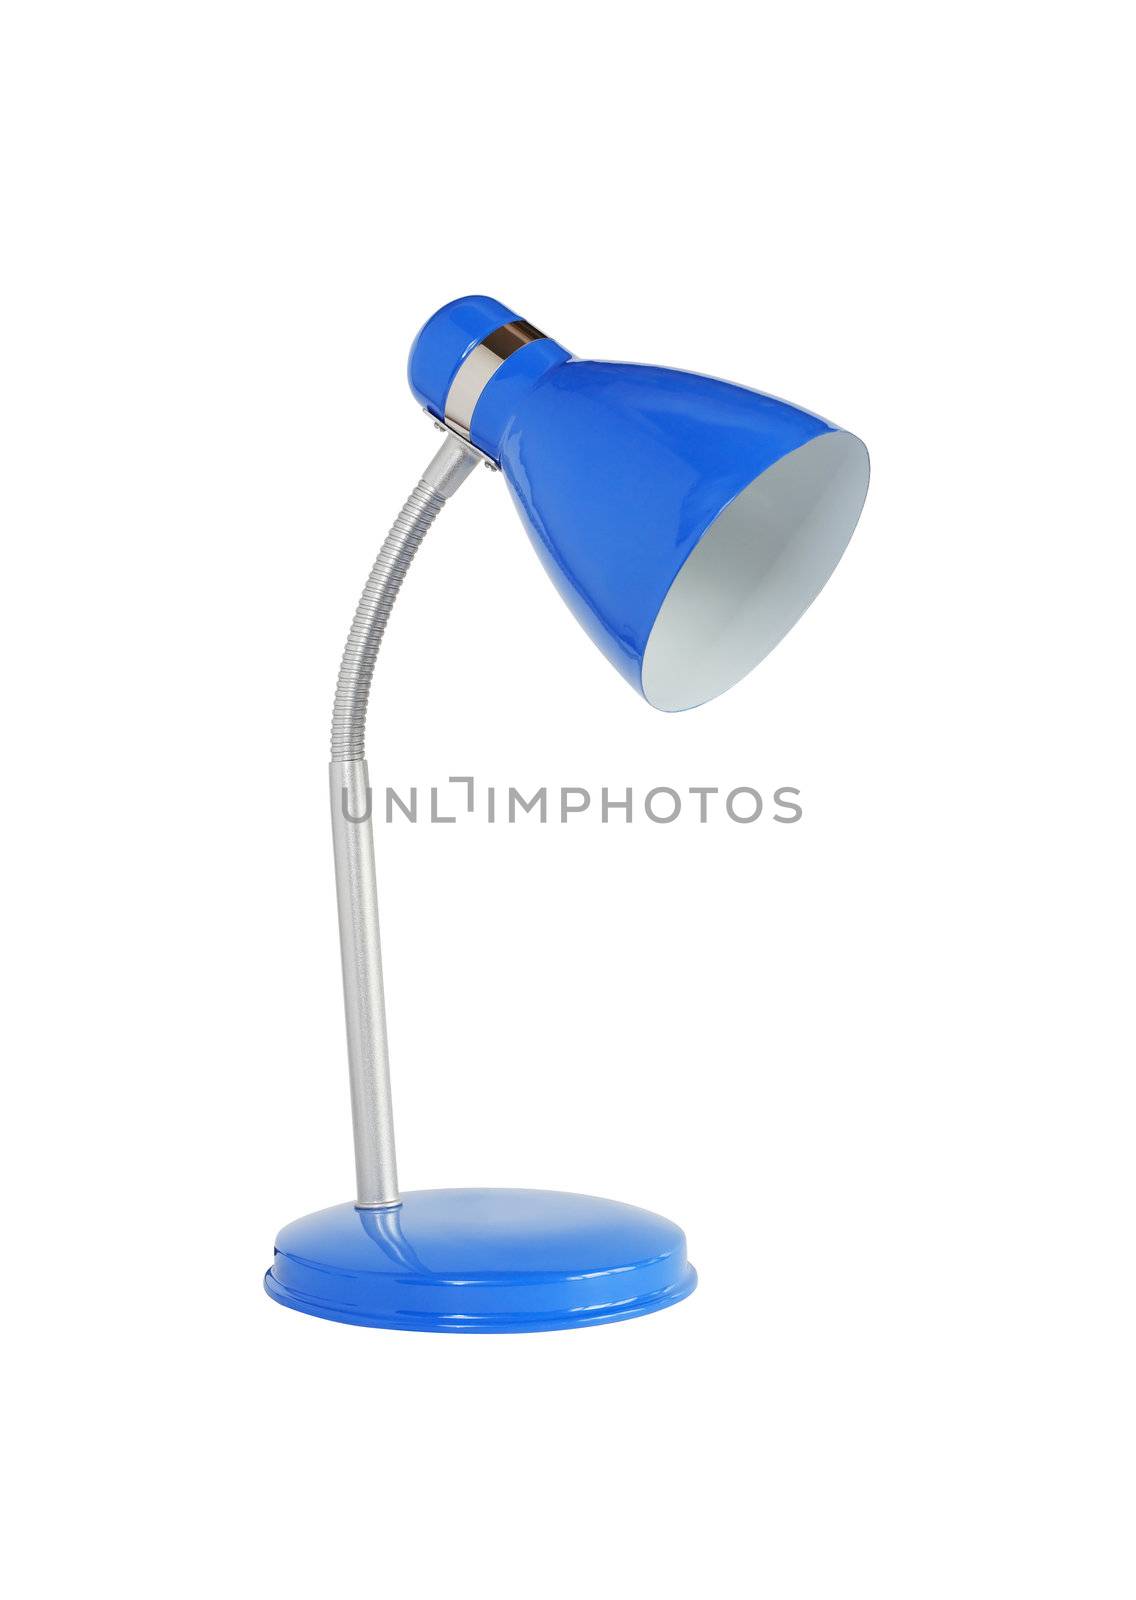 Modern blue desk lamp on white background. Isolated with clipping path